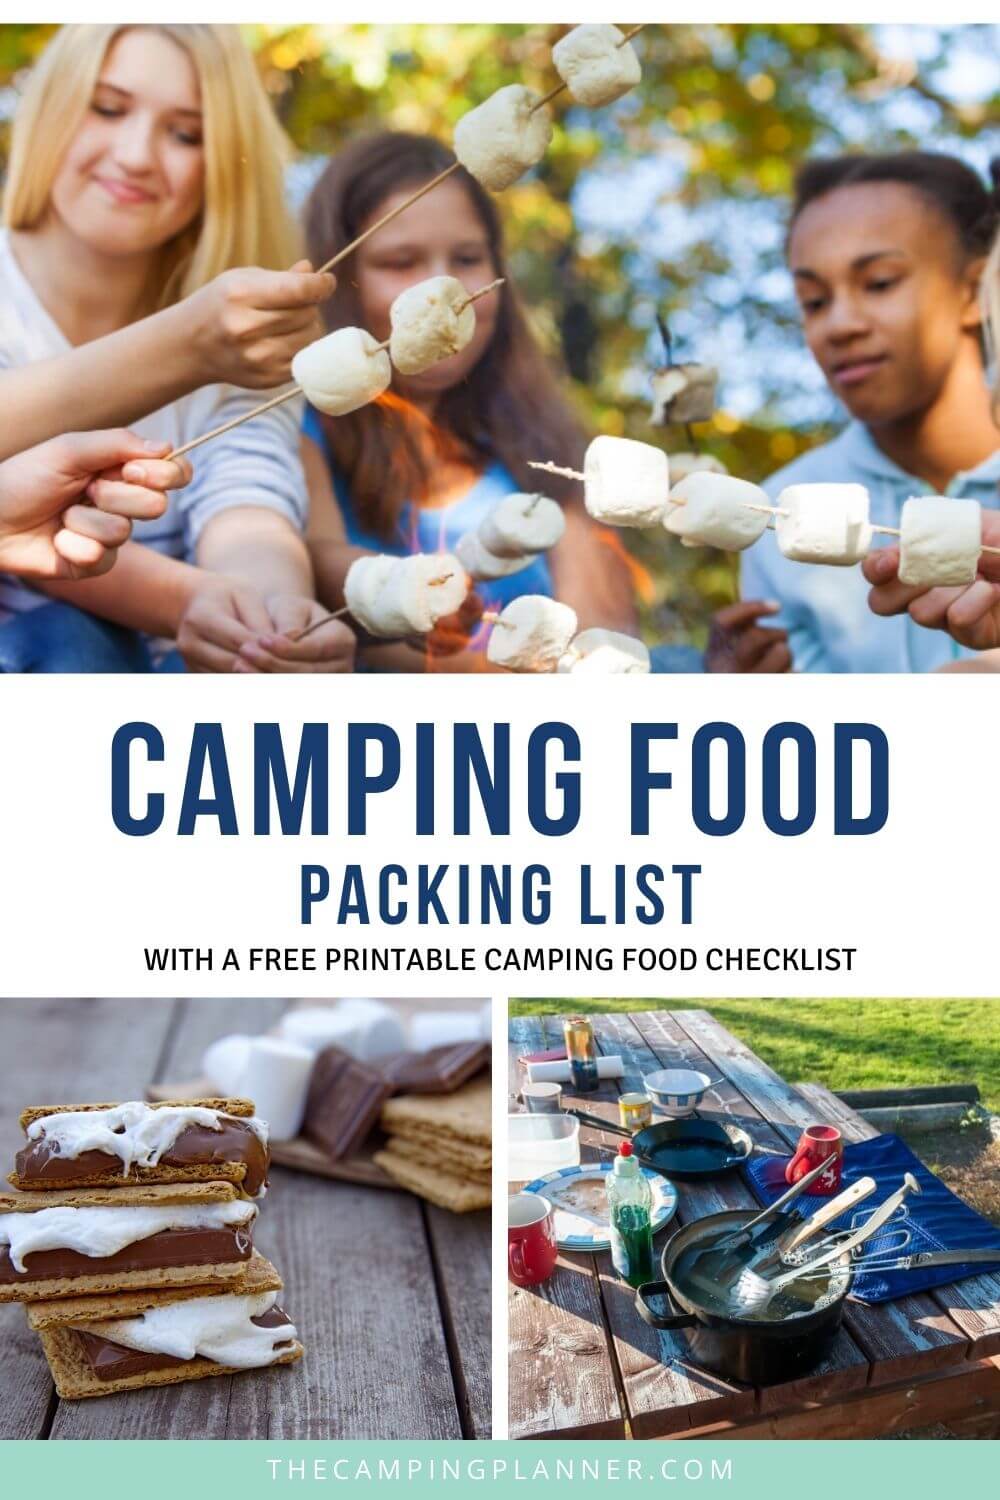 camping food packing list with a free printable camping food checklist.